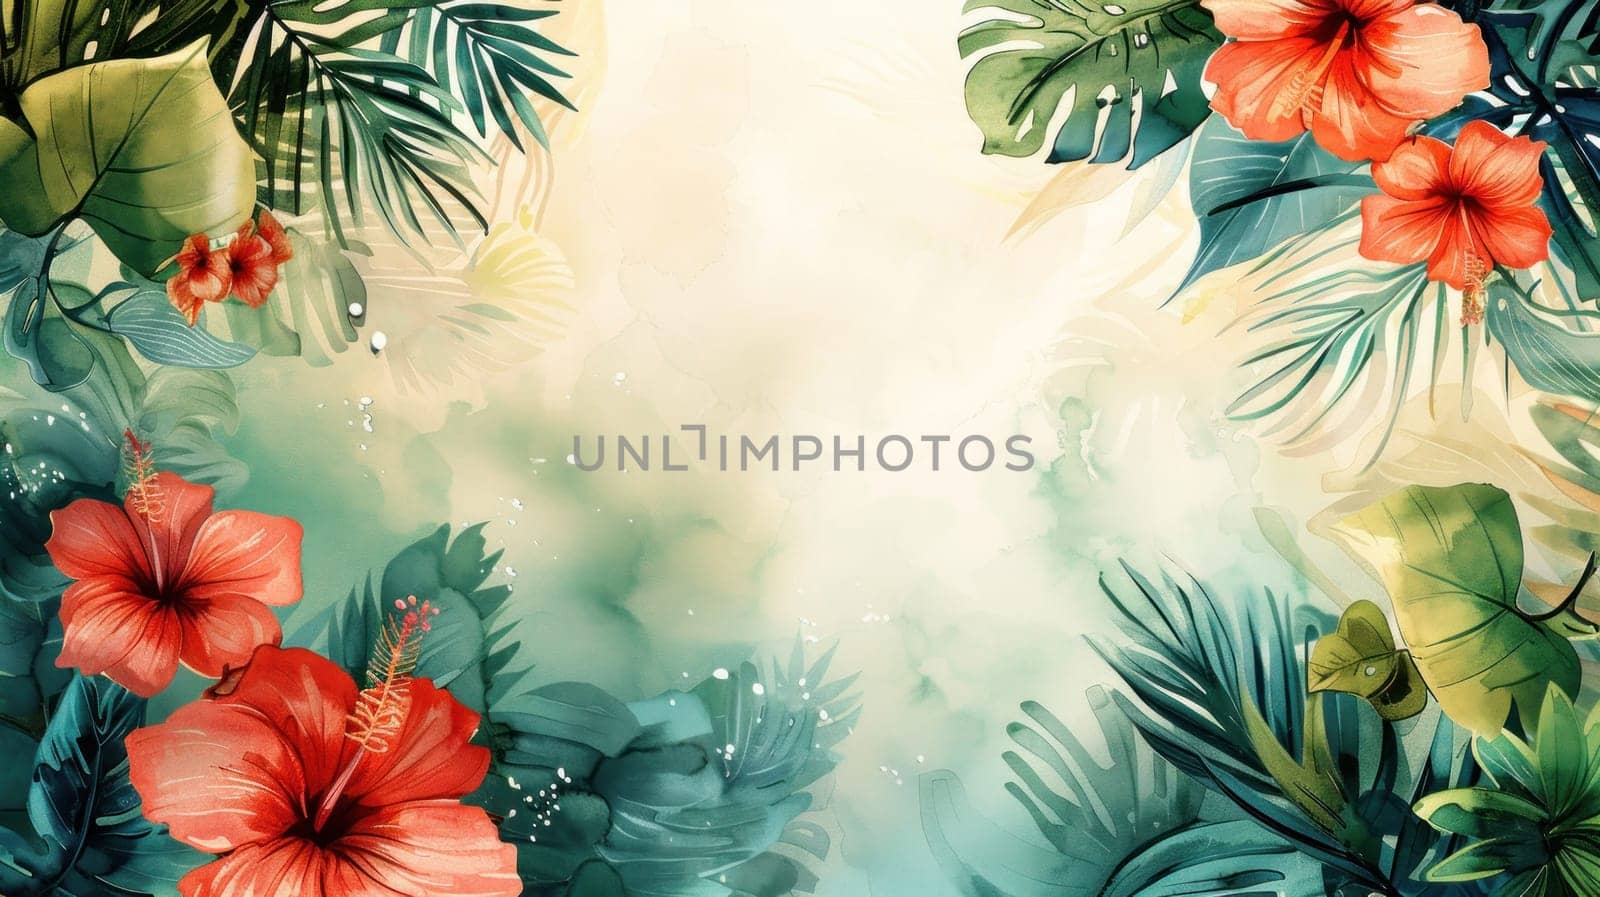 A painting of a tropical scene with pink flowers and green leaves by golfmerrymaker